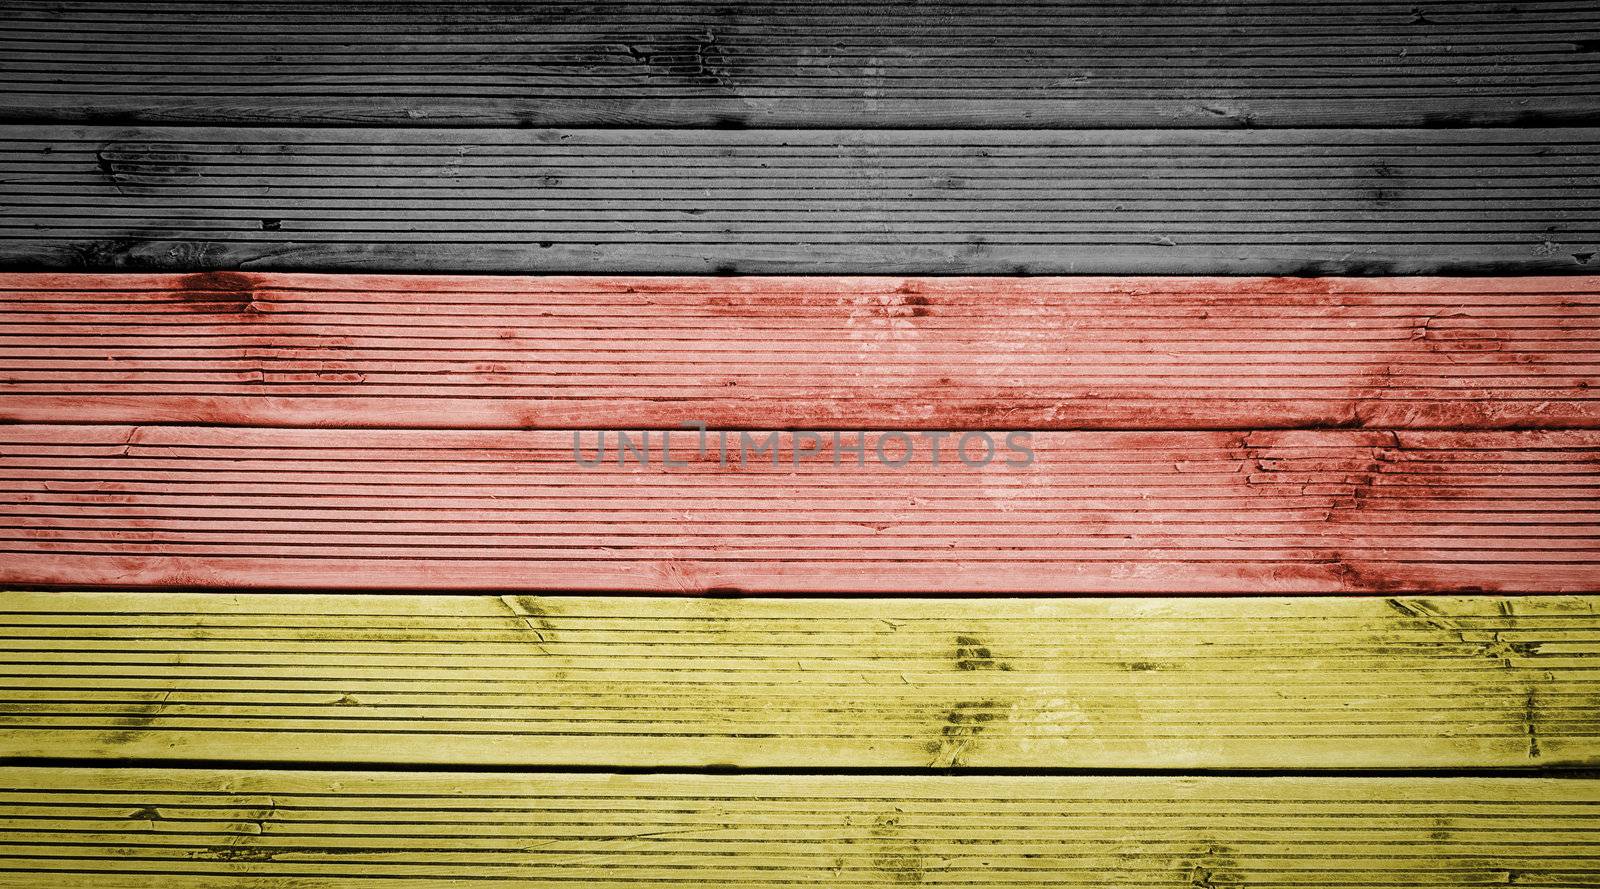 Natural wood planks texture background with the colors of the flag of Germany